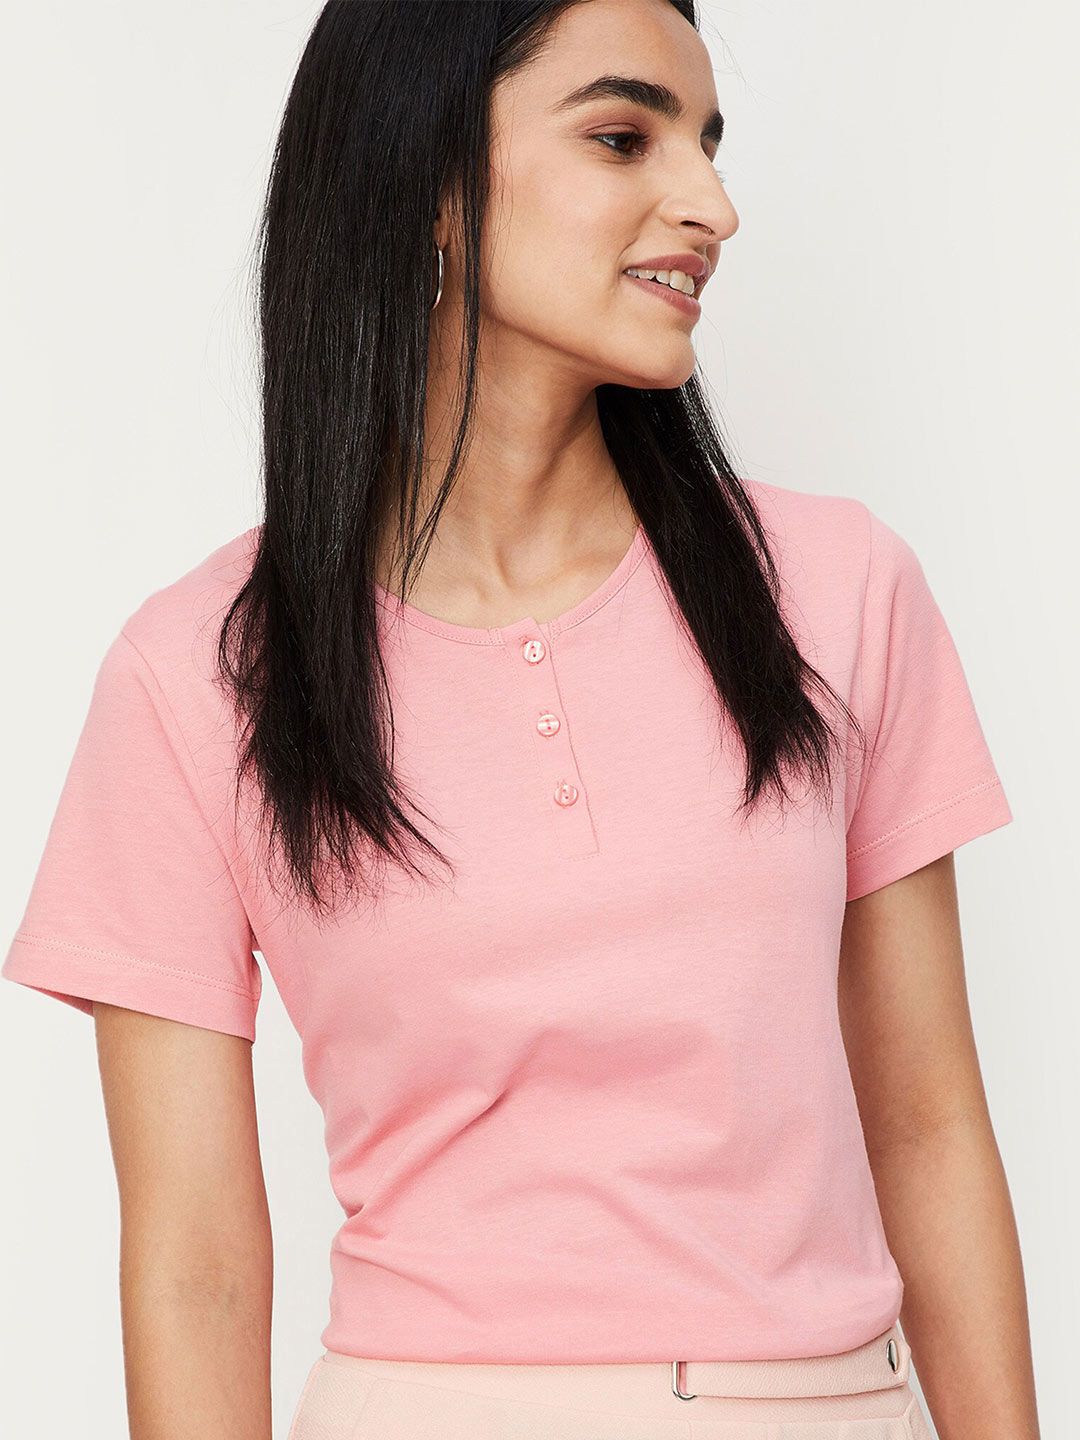 max Women Pink Solid Round Neck Cotton Top Price in India